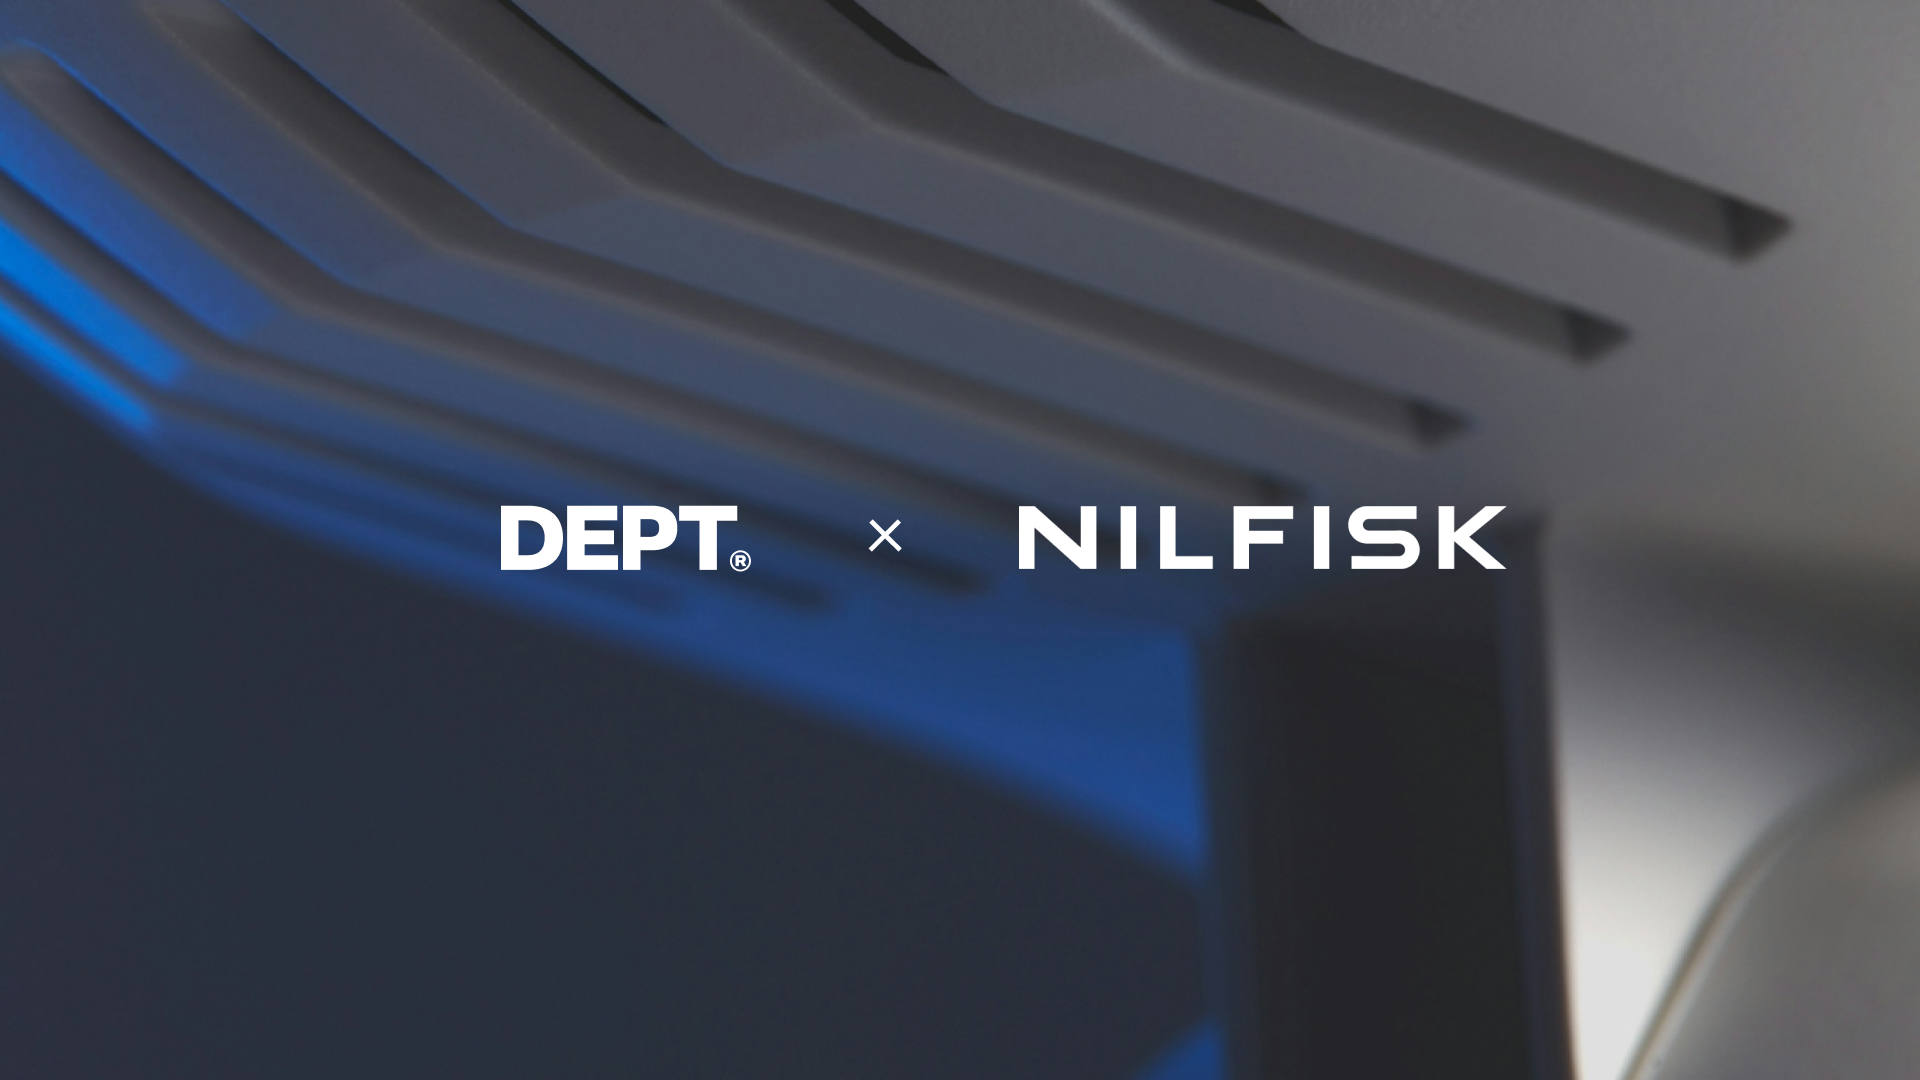 Nilfisk selects DEPT® to build a scalable e-commerce platform